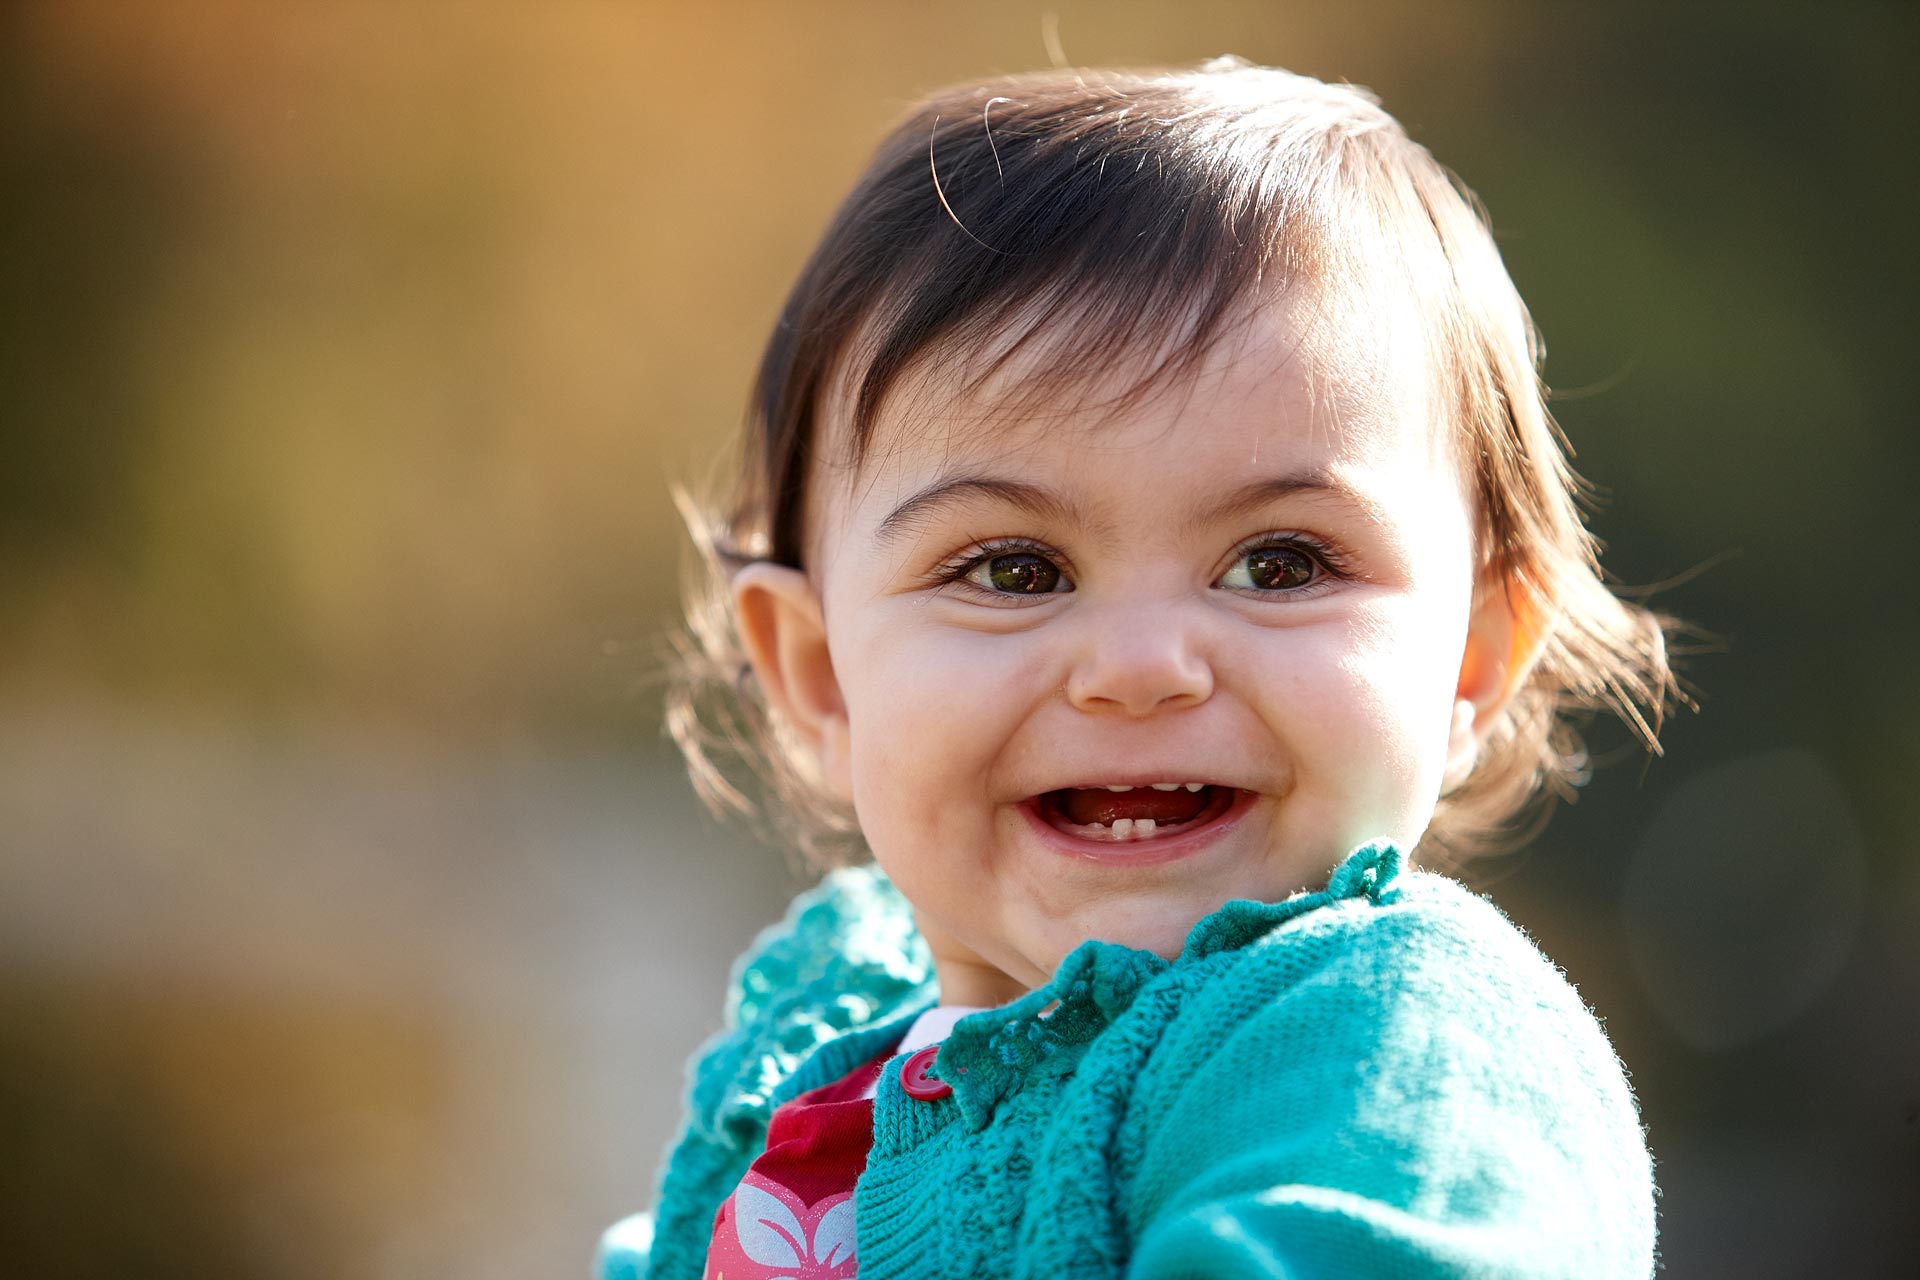 A baby smiling open mouthed, showing emerging teeth